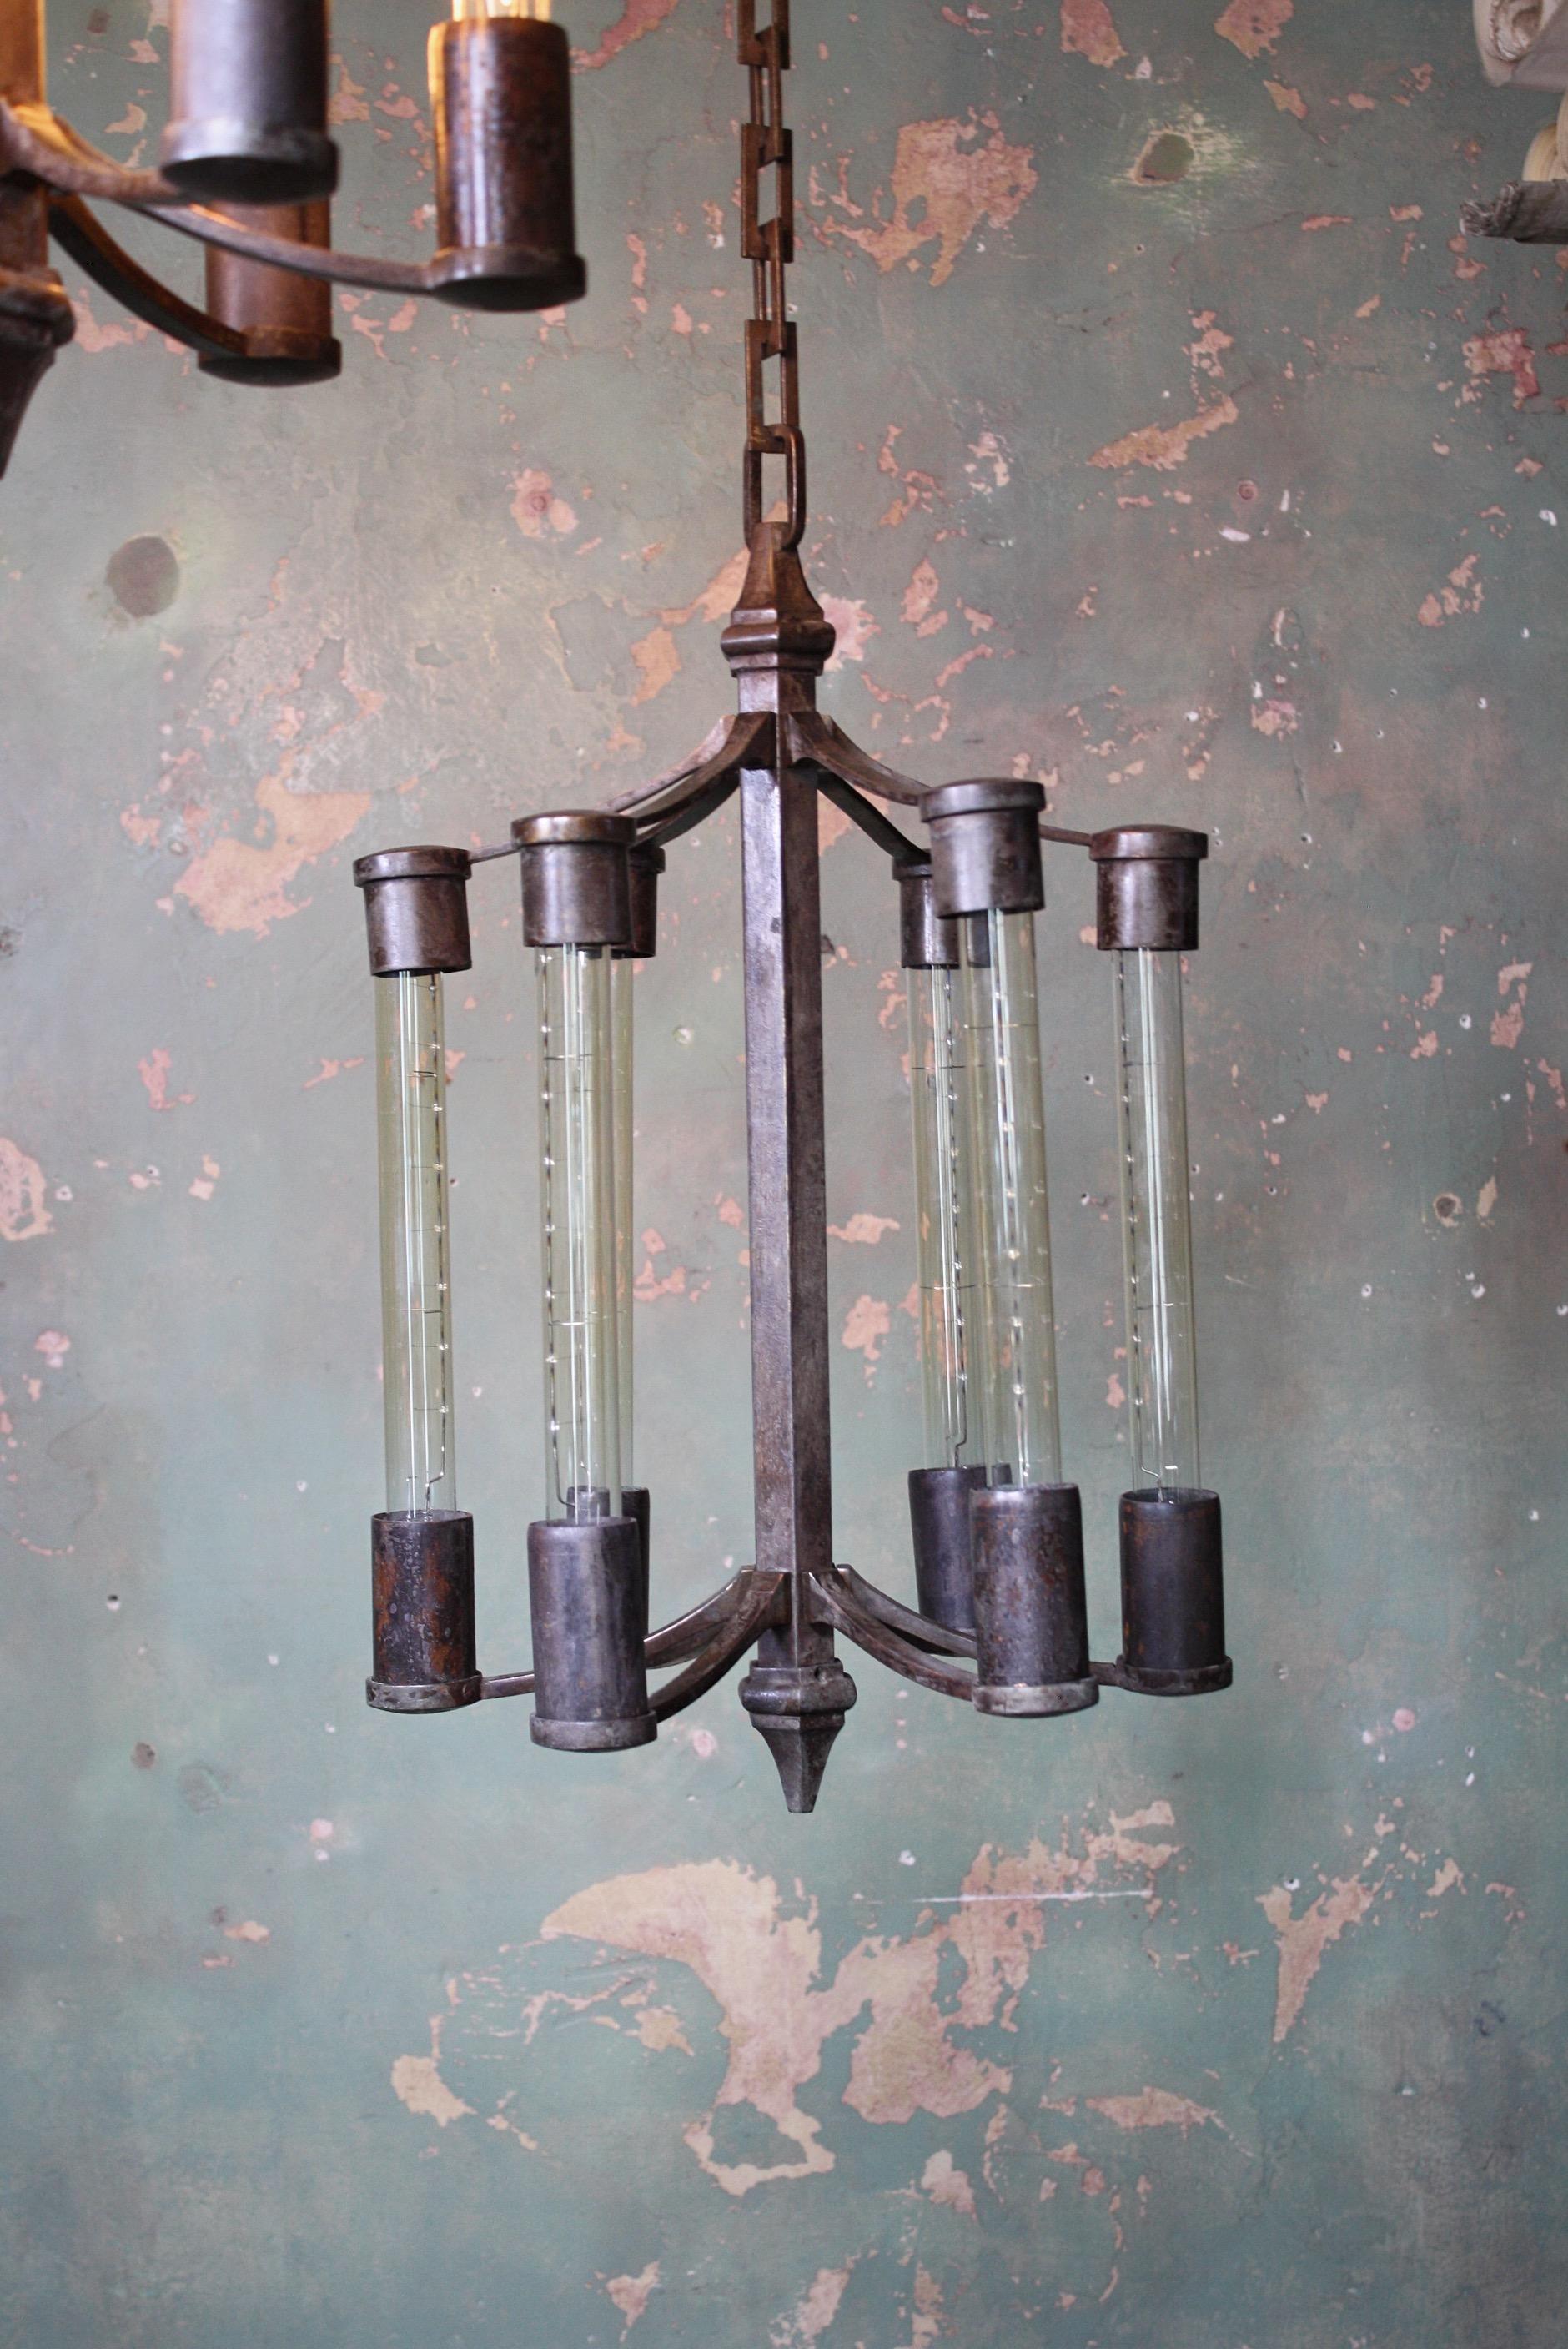 A striking trio (two sold) of unusual cast bronze pendants, the central column has six arms that contain the elongated filament bulbs with collars at either end. 

The pendants have new t30 dimmable Edison bulbs, all metal sections have a warm and